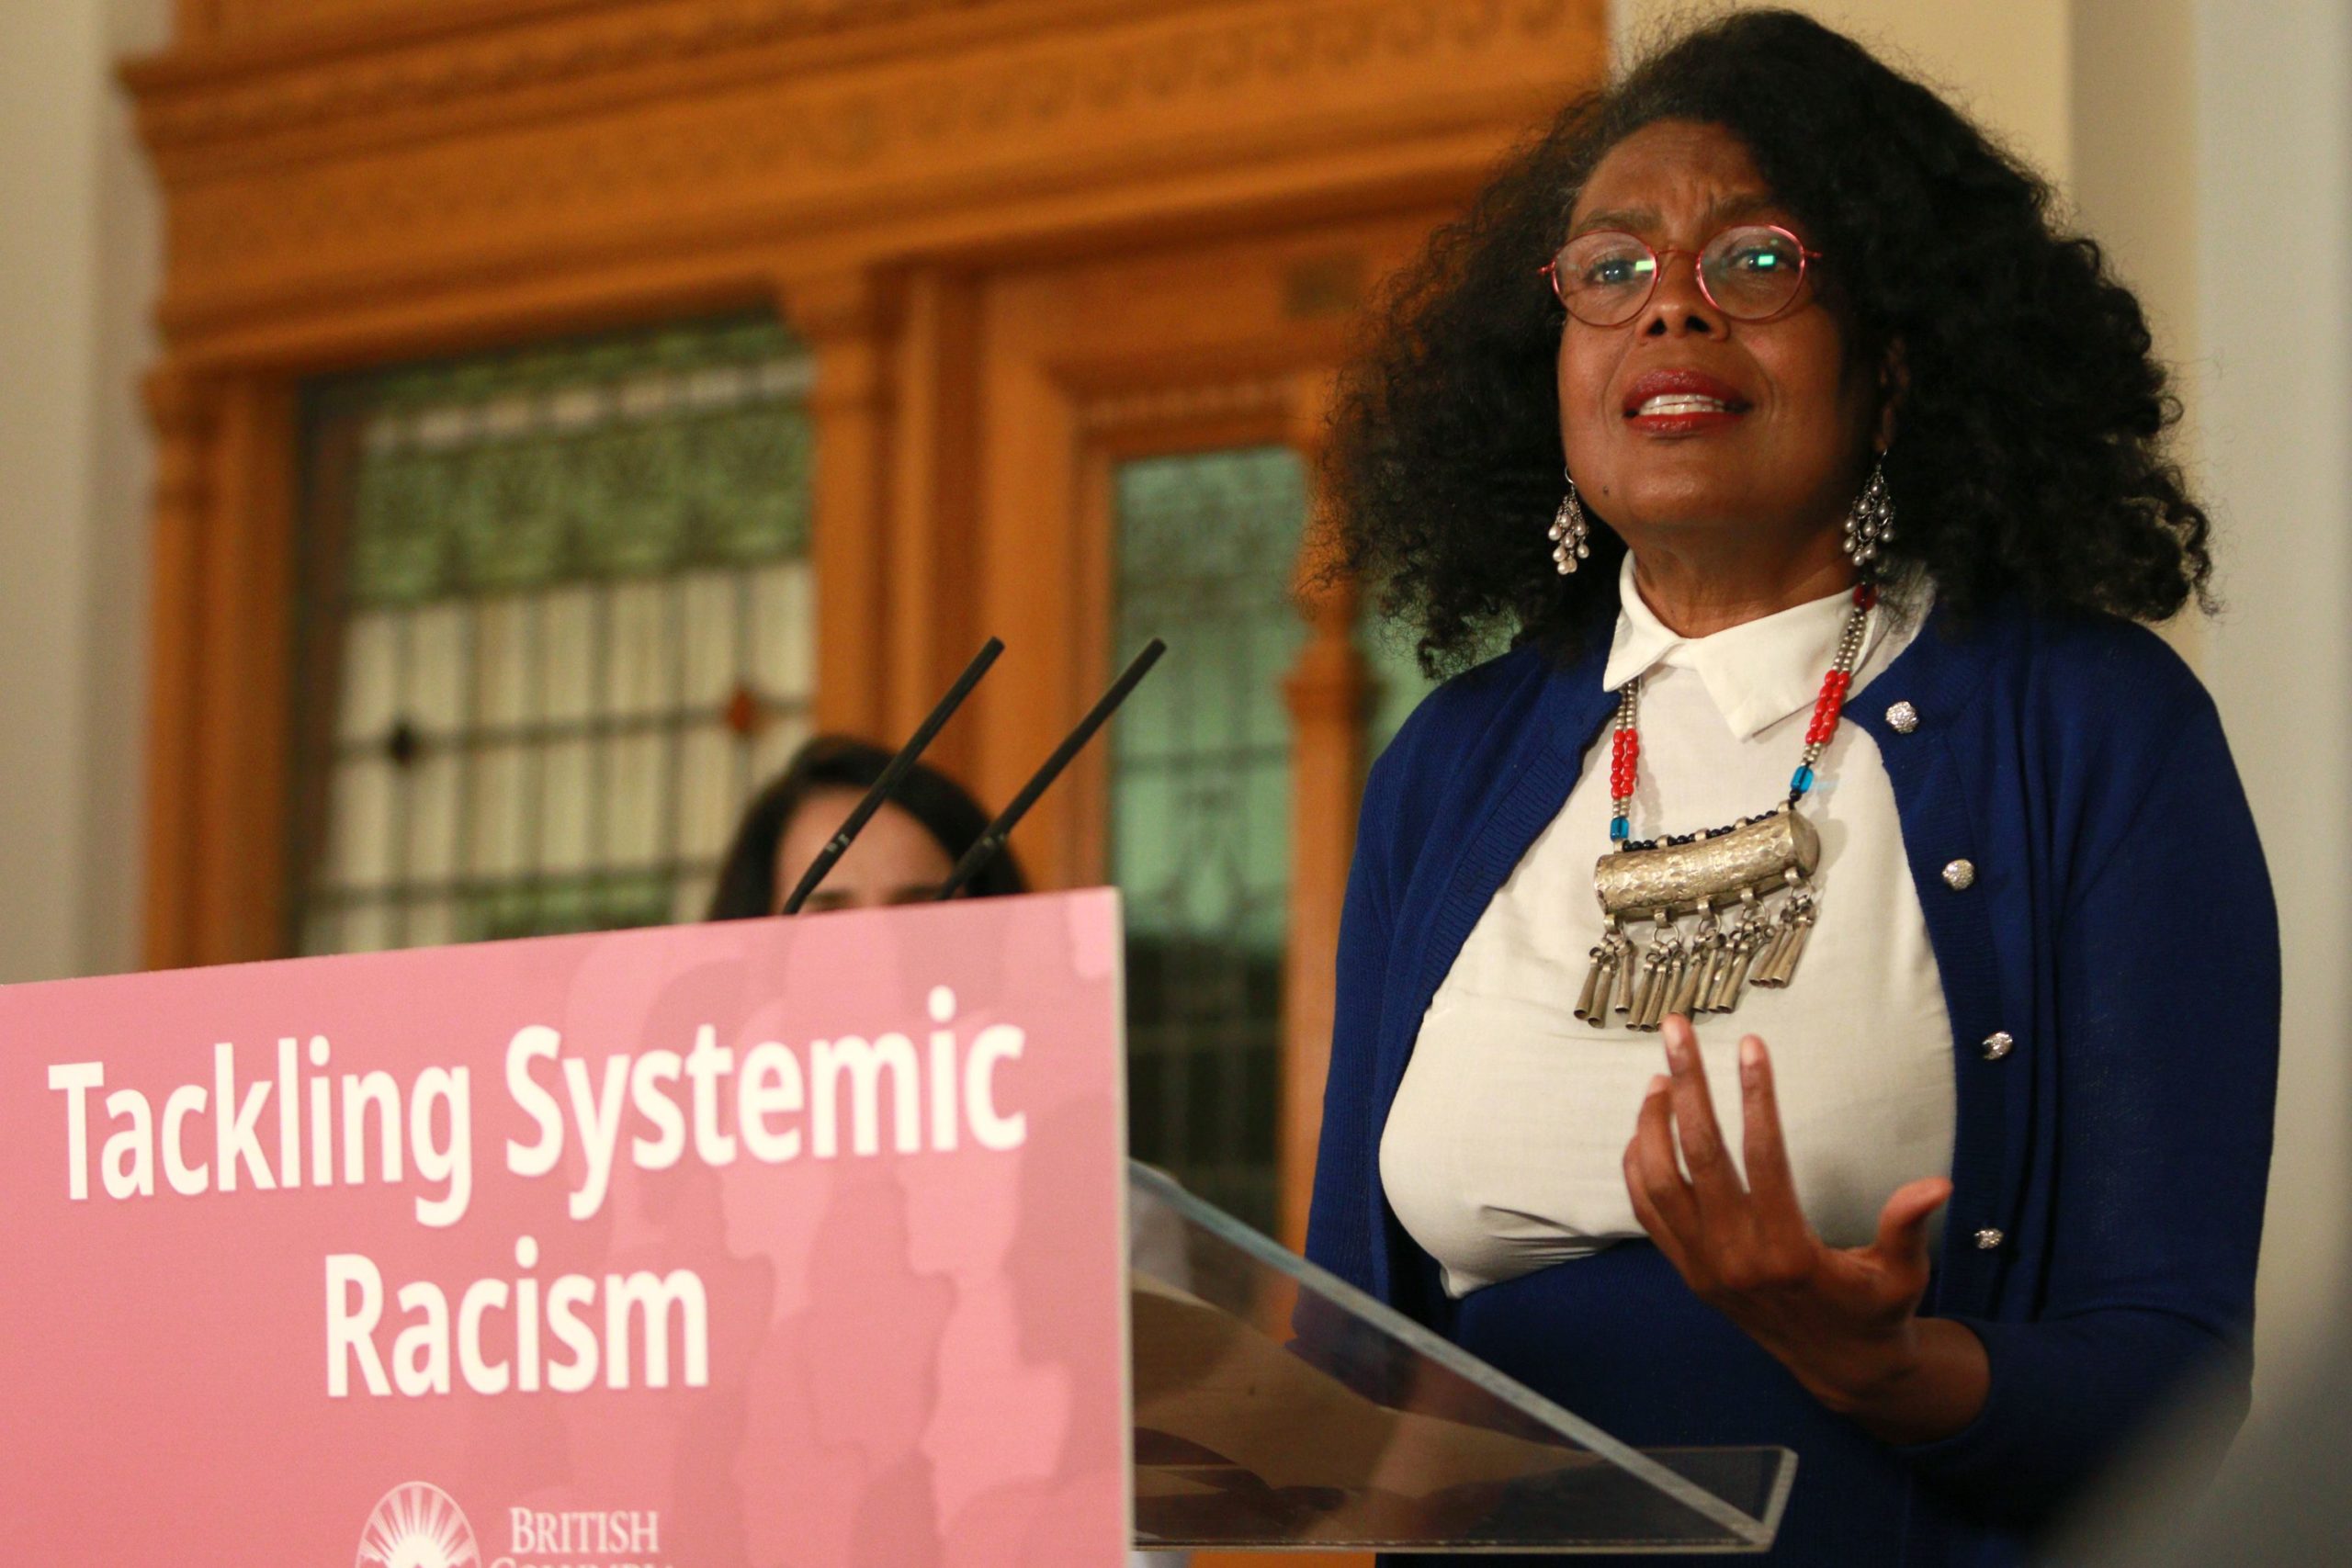 Dr. June Francis, co-director, The Co-Laboratorio Project; director, Institute for Diaspora Research and Engagement; associate professor, Beedie School of Business SFU; chair, Hogan's Alley Society, speaking at a podium during a press conference at the introduction of BC’s Anti Racism Data Act.